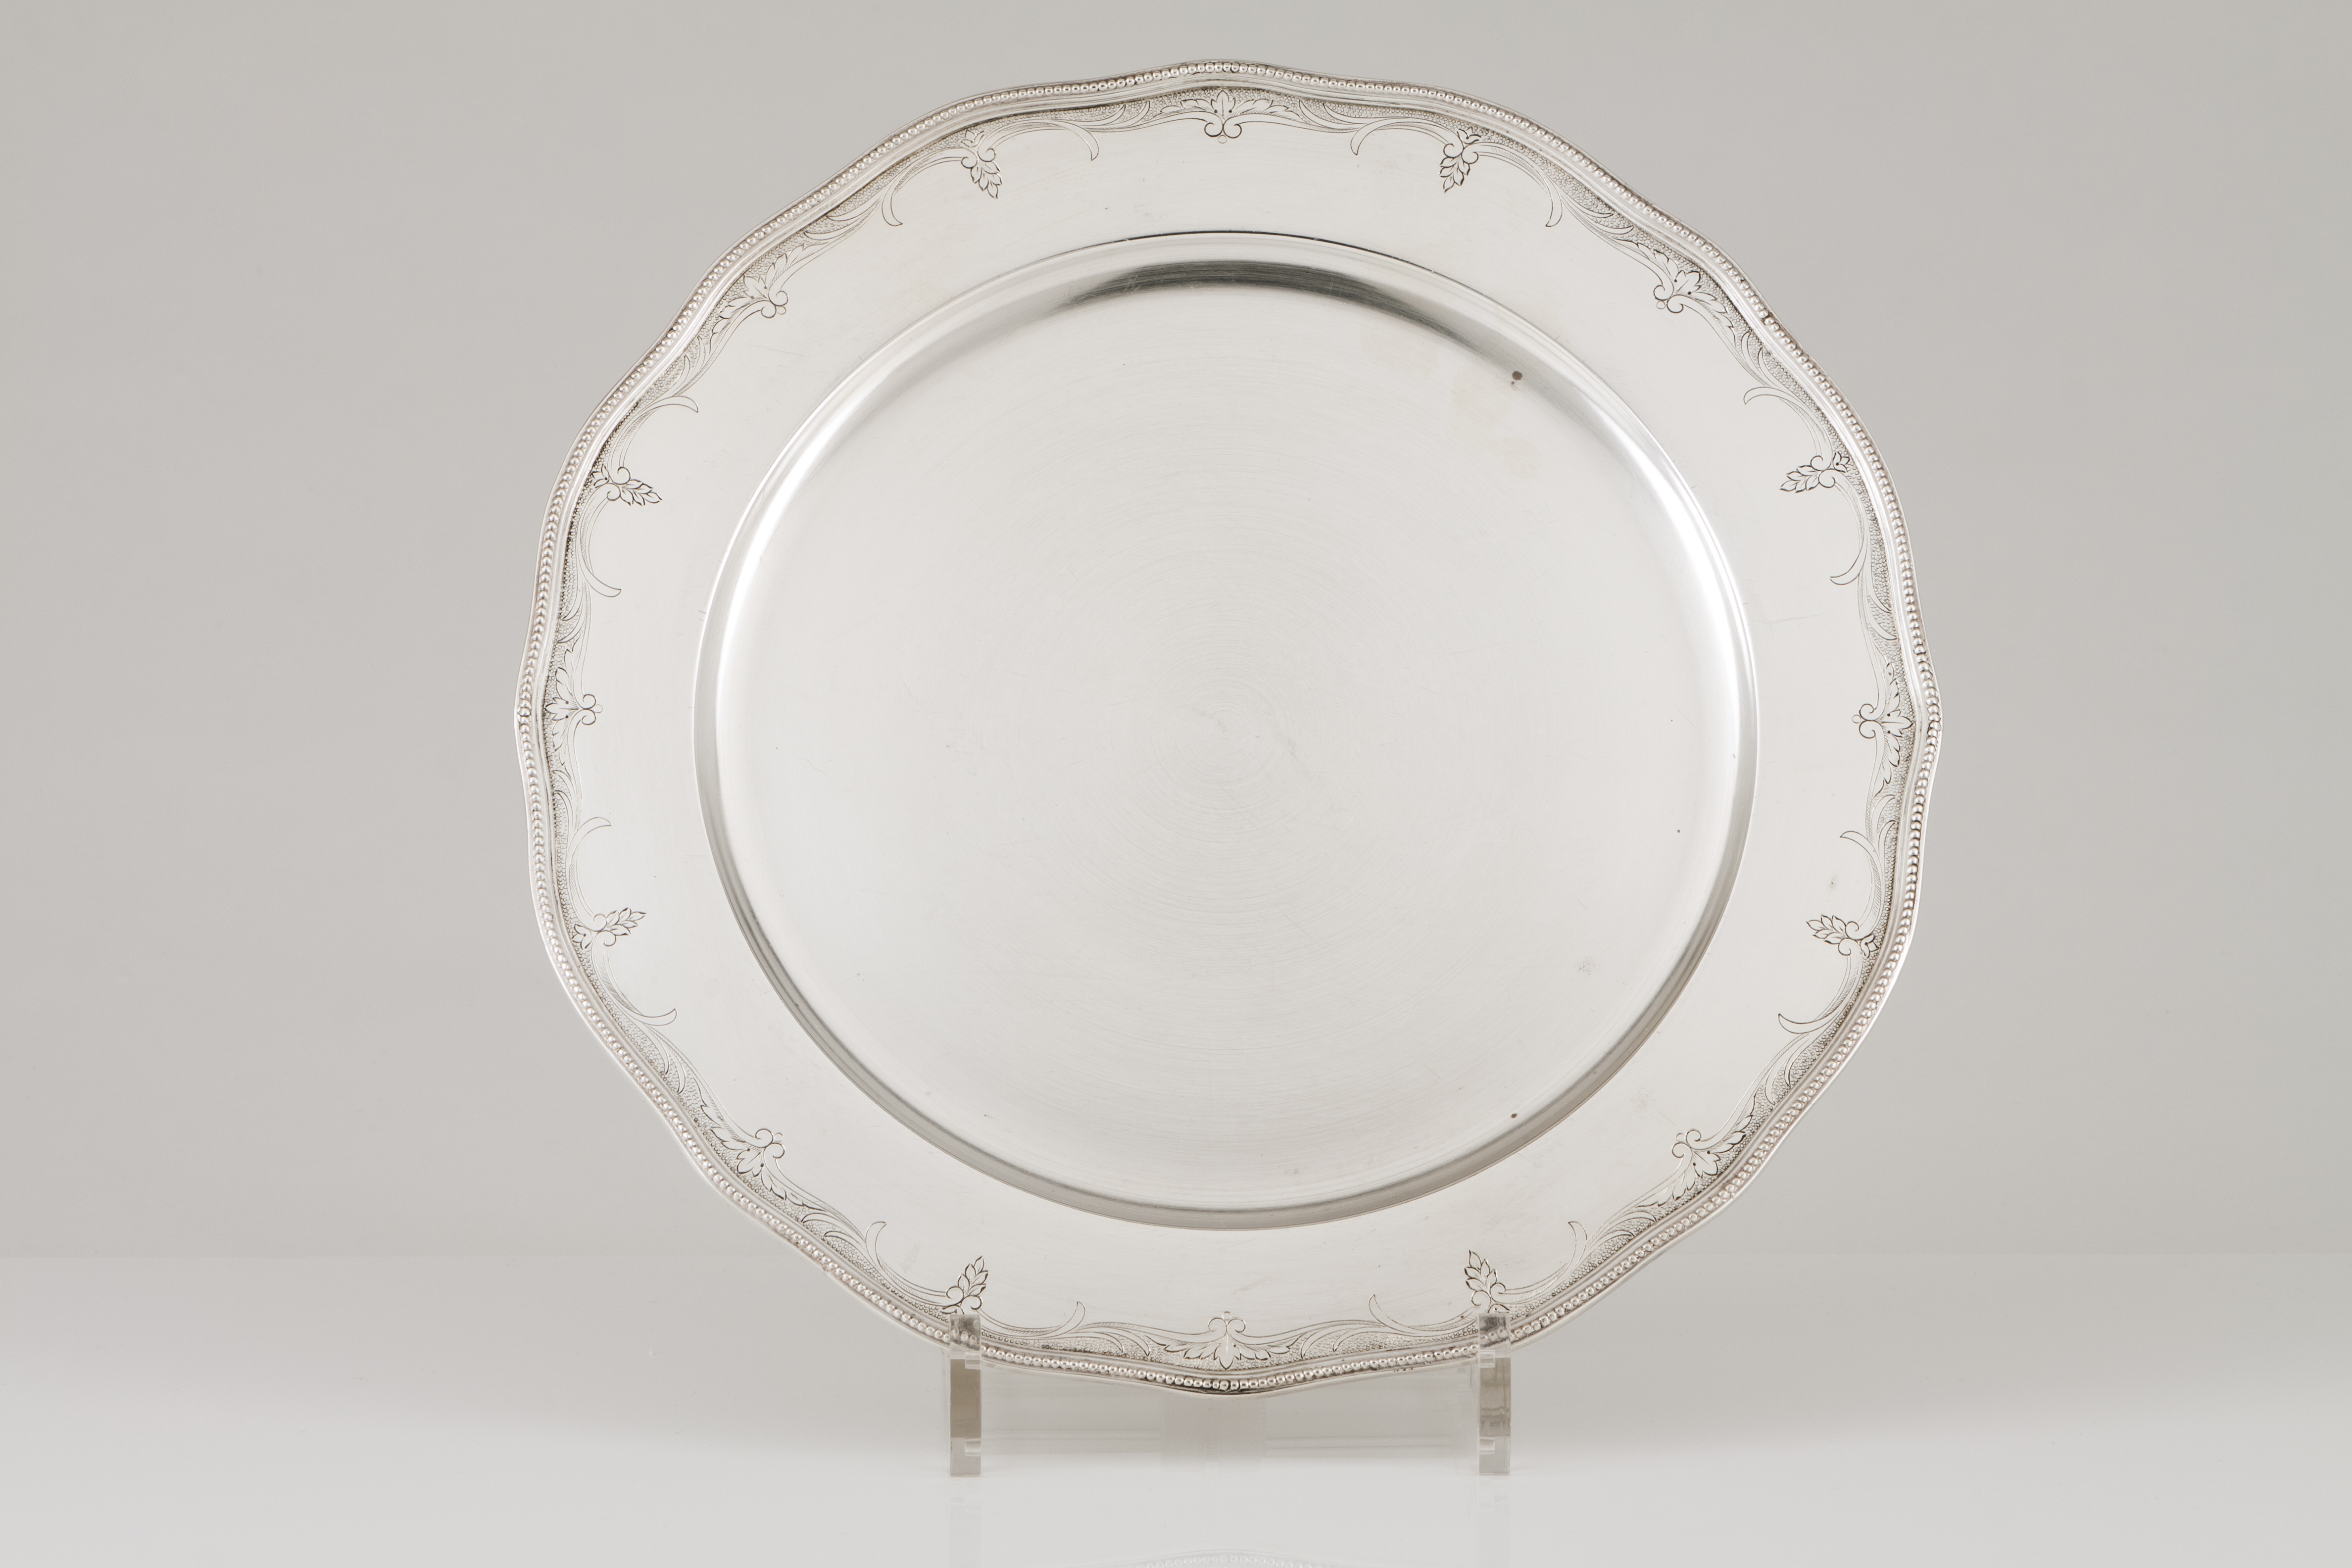 A salverPortuguese silver Plain centre of scalloped lip engraved with foliage band and beaded frieze